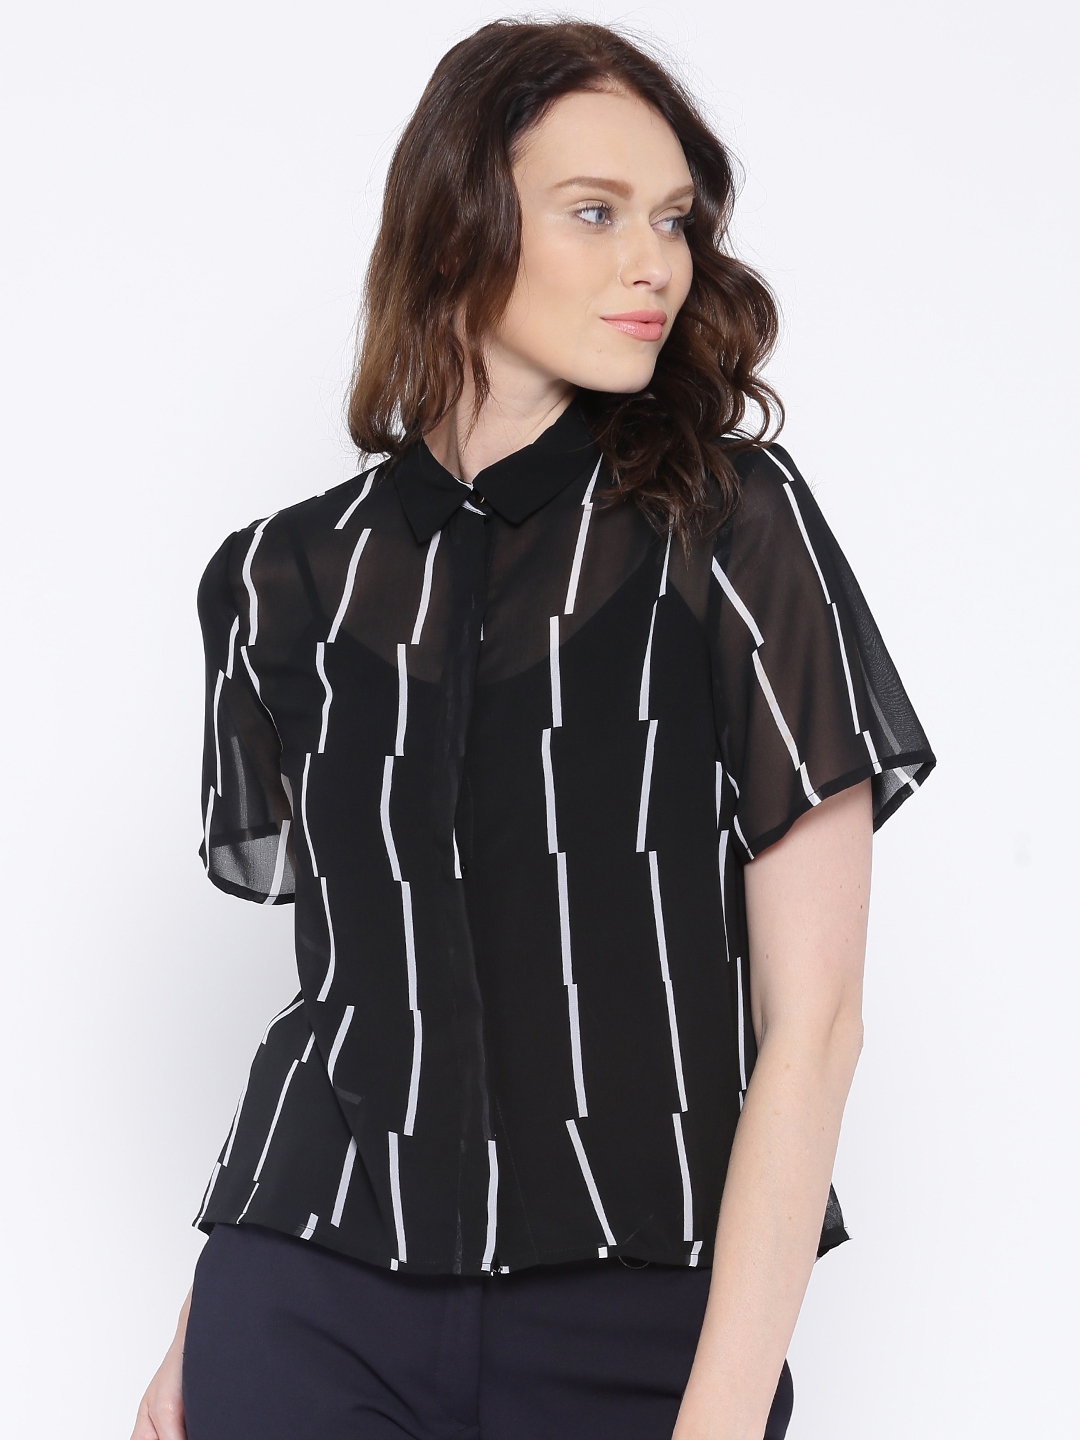 Buy Allen Solly Woman Black & White Regular Fit Striped Casual Shirt ...